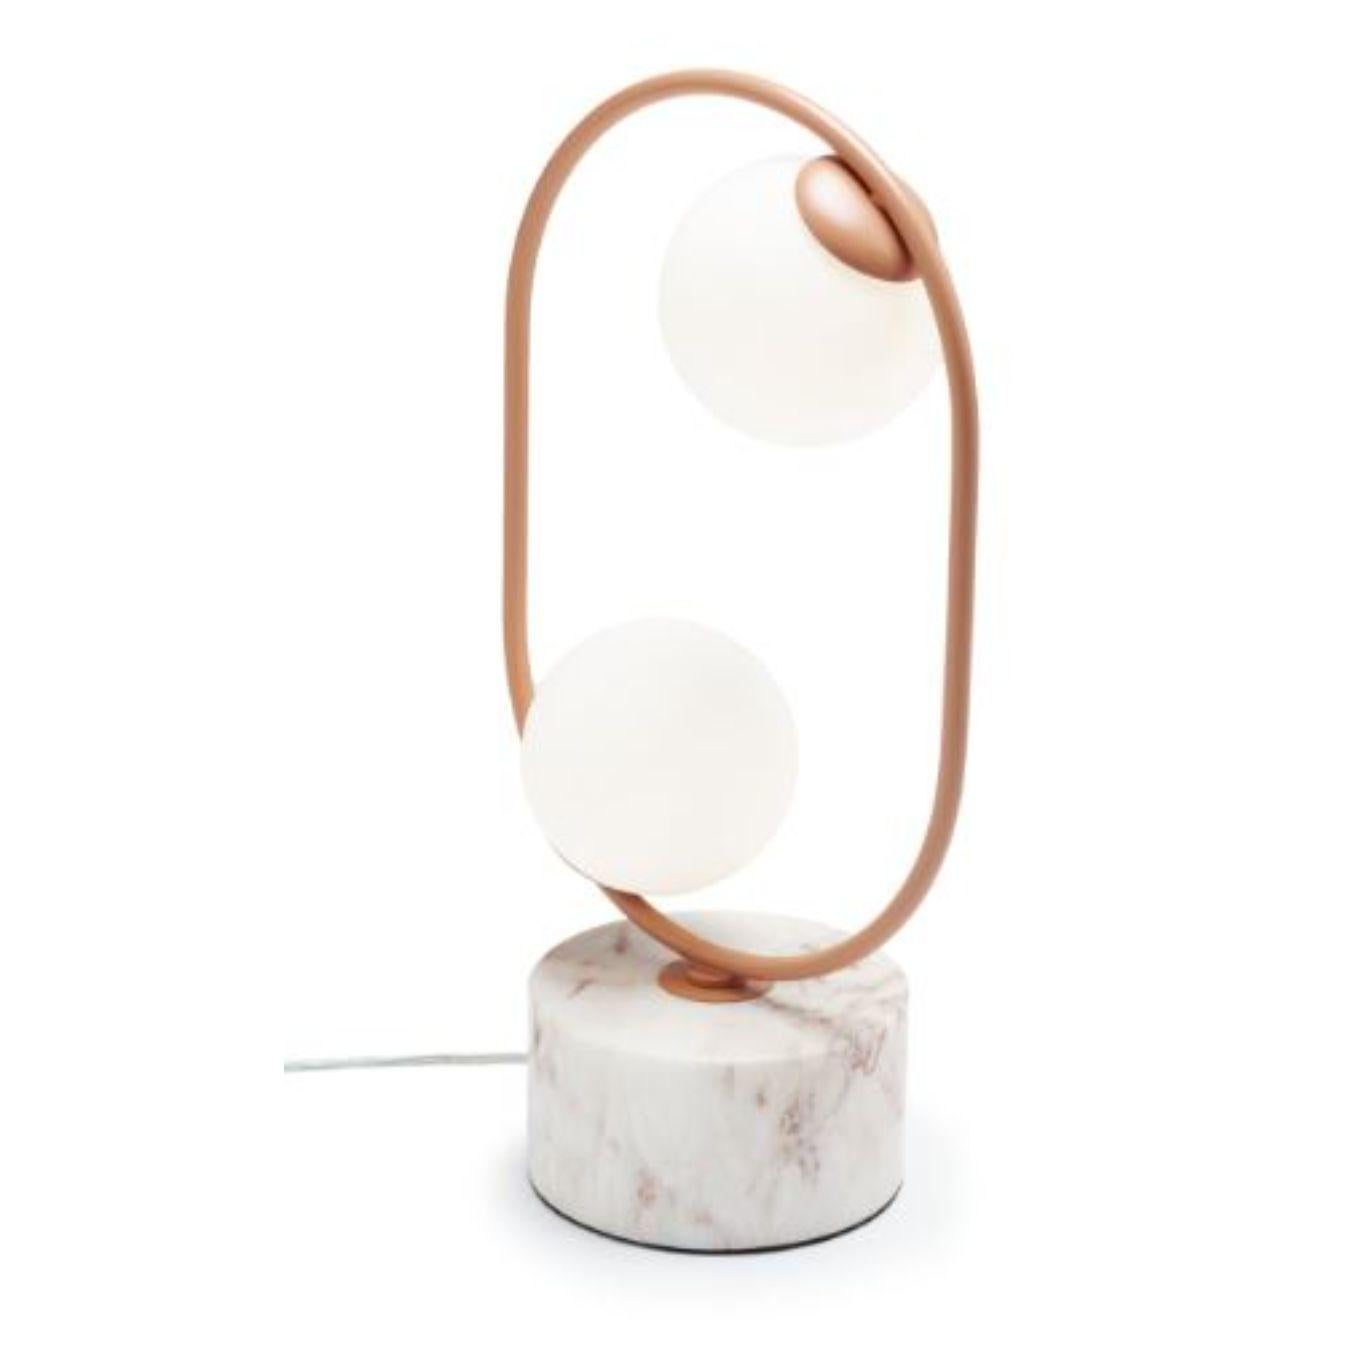 Salmon loop table I lamp with marble base by Dooq
Dimensions: W 30 x D 15 x H 50 cm
Materials: lacquered metal, polished or brushed metal, marble.
Also available in different colours and materials.

Information:
230V/50Hz
2 x max. G9
4W